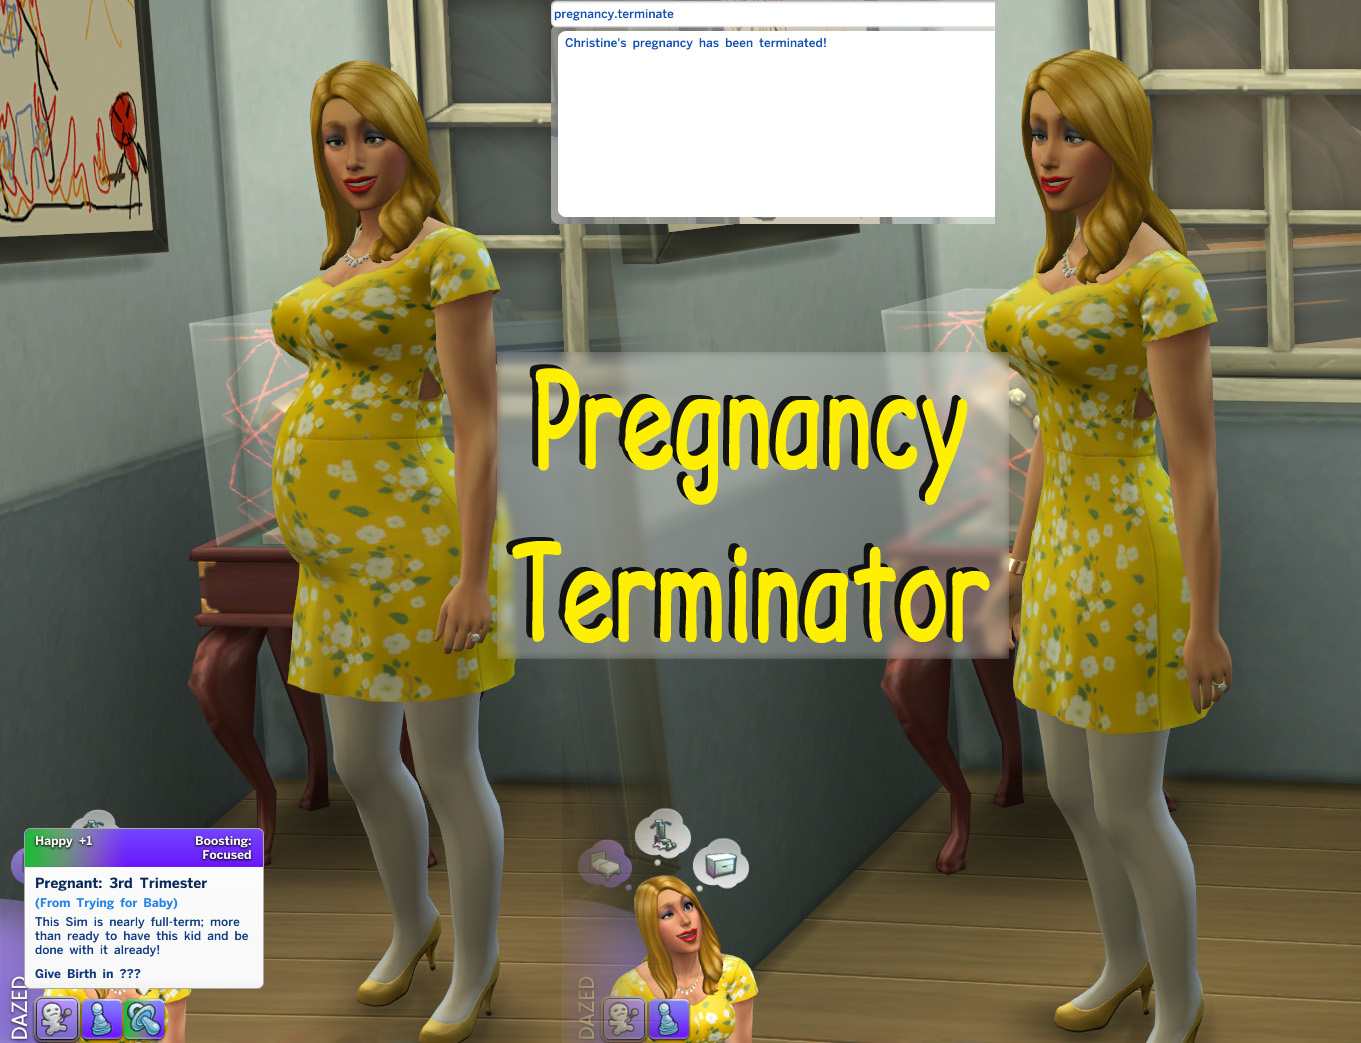 sims 3 miscarriage mod